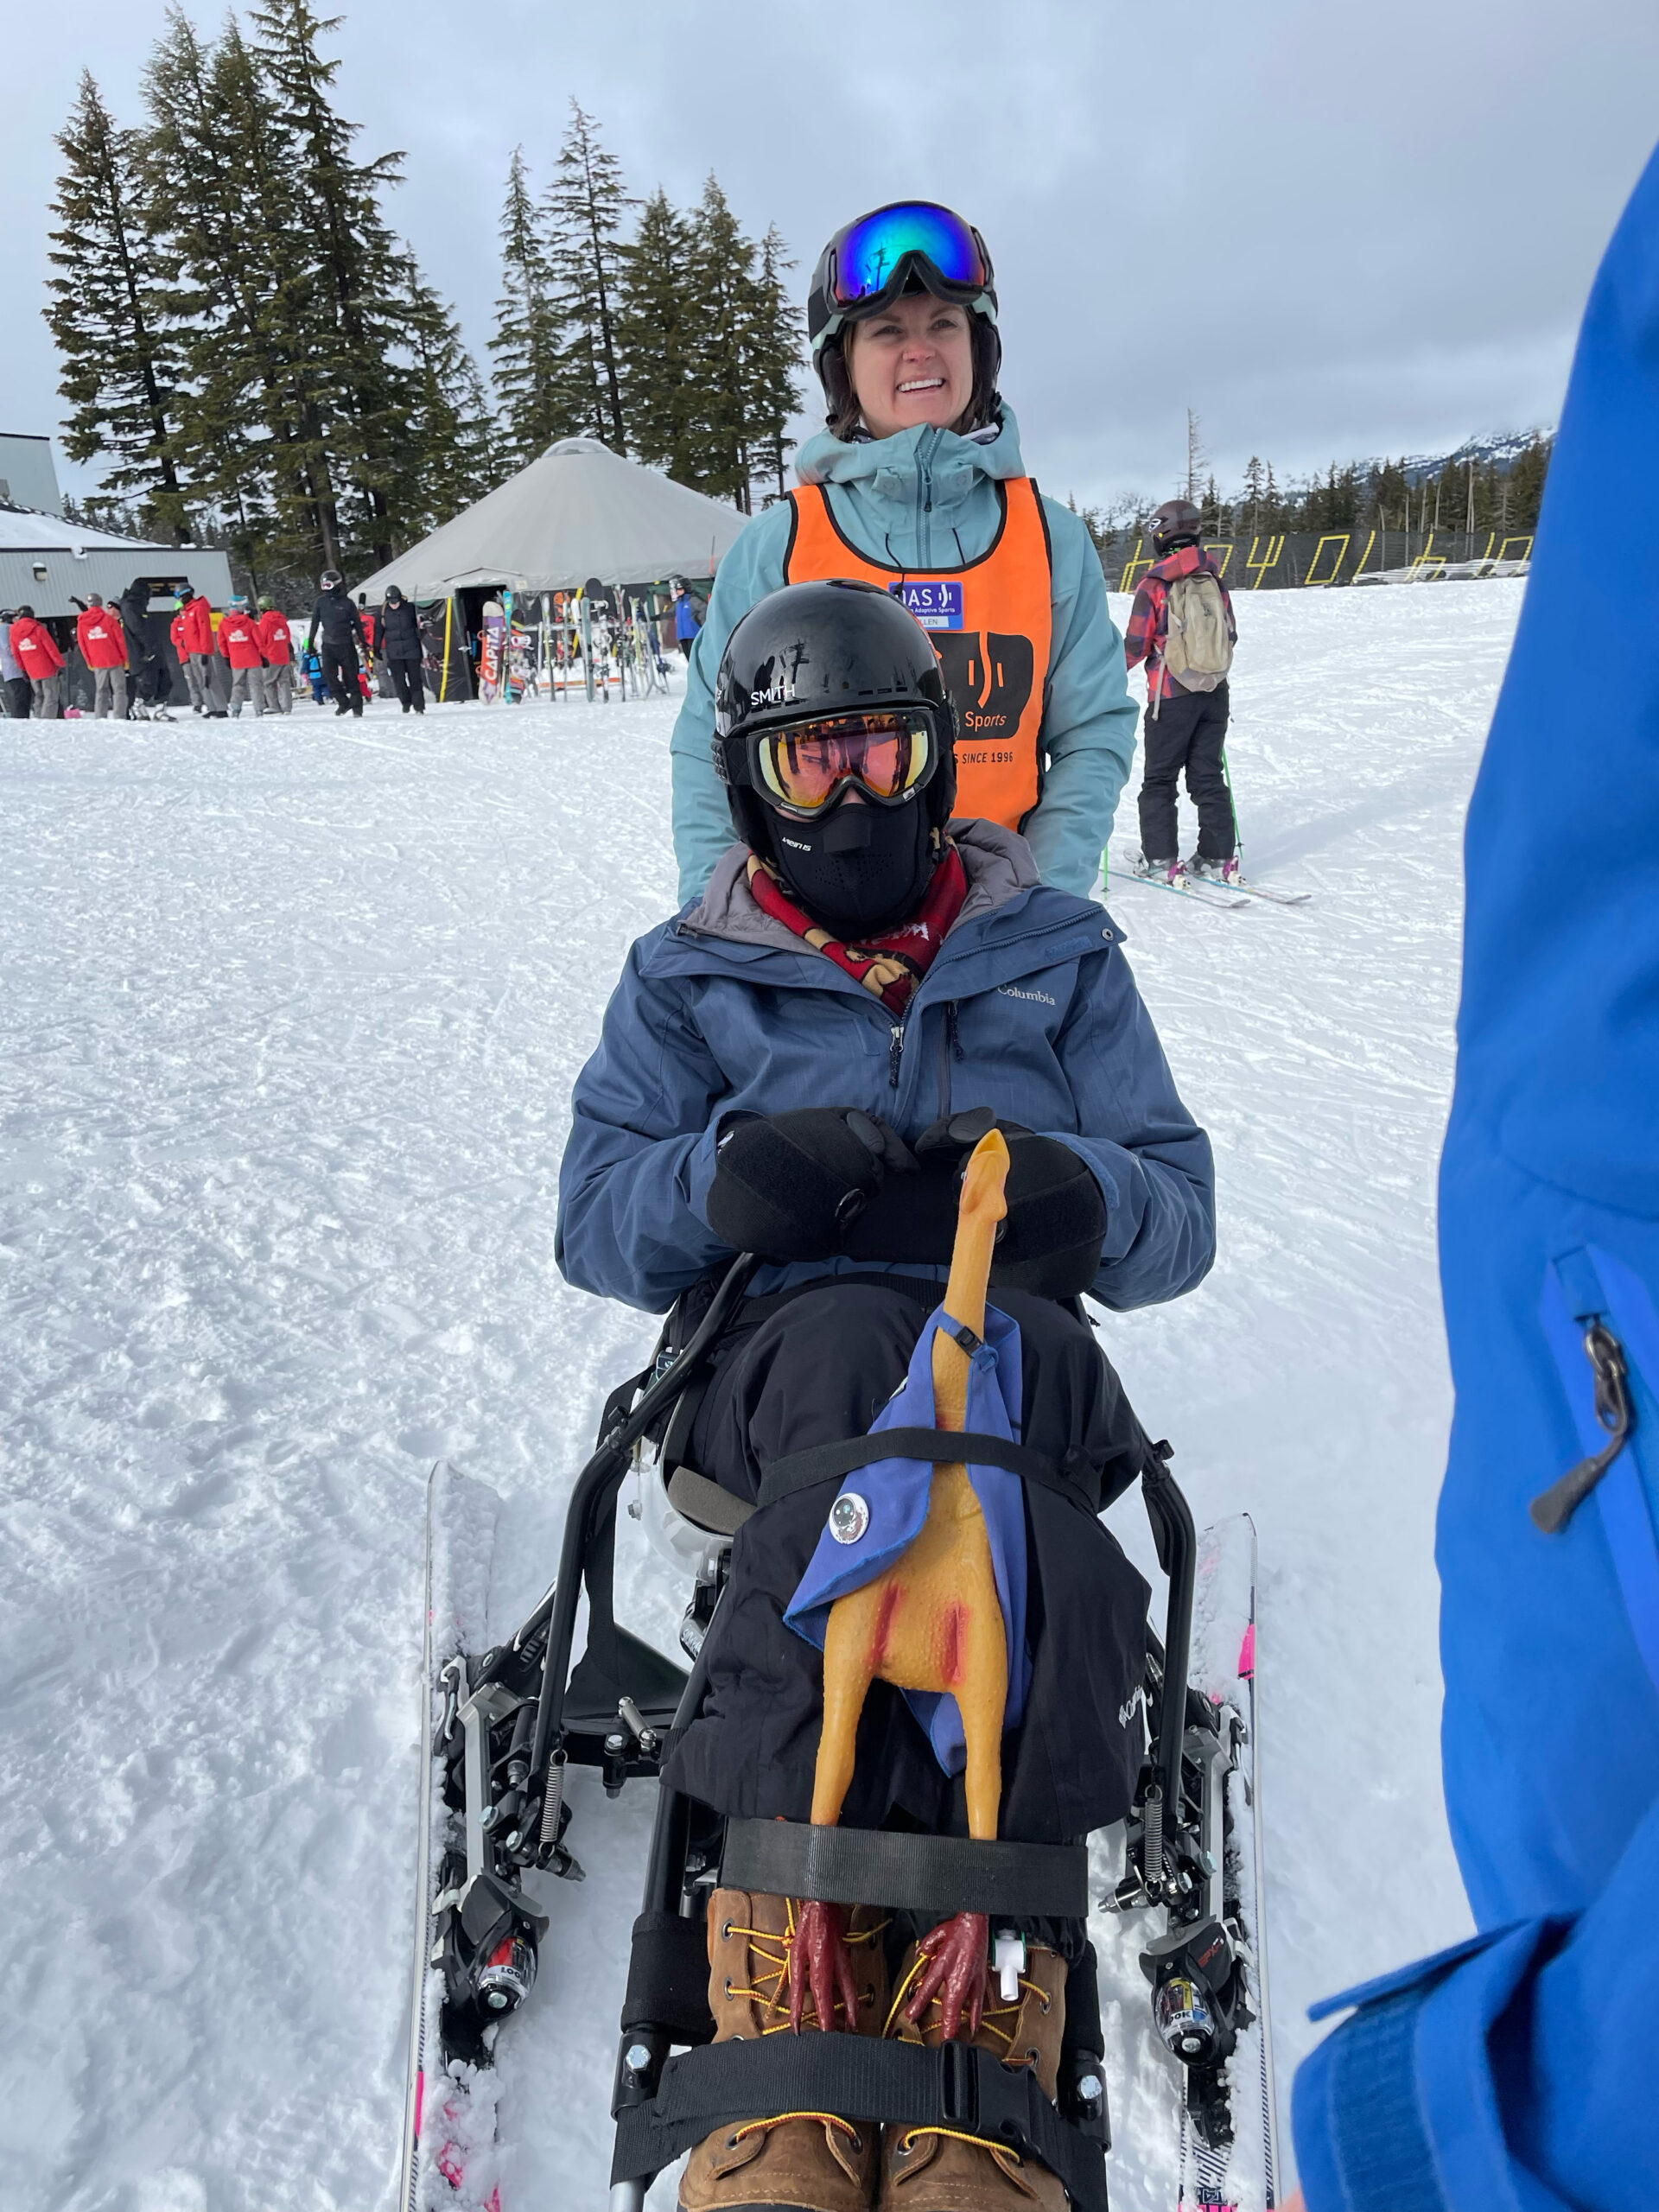 Jack in a sit-ski, an OAS volunteer standing behind him. His rubber chicken is attached to the front of his shins on the ski.